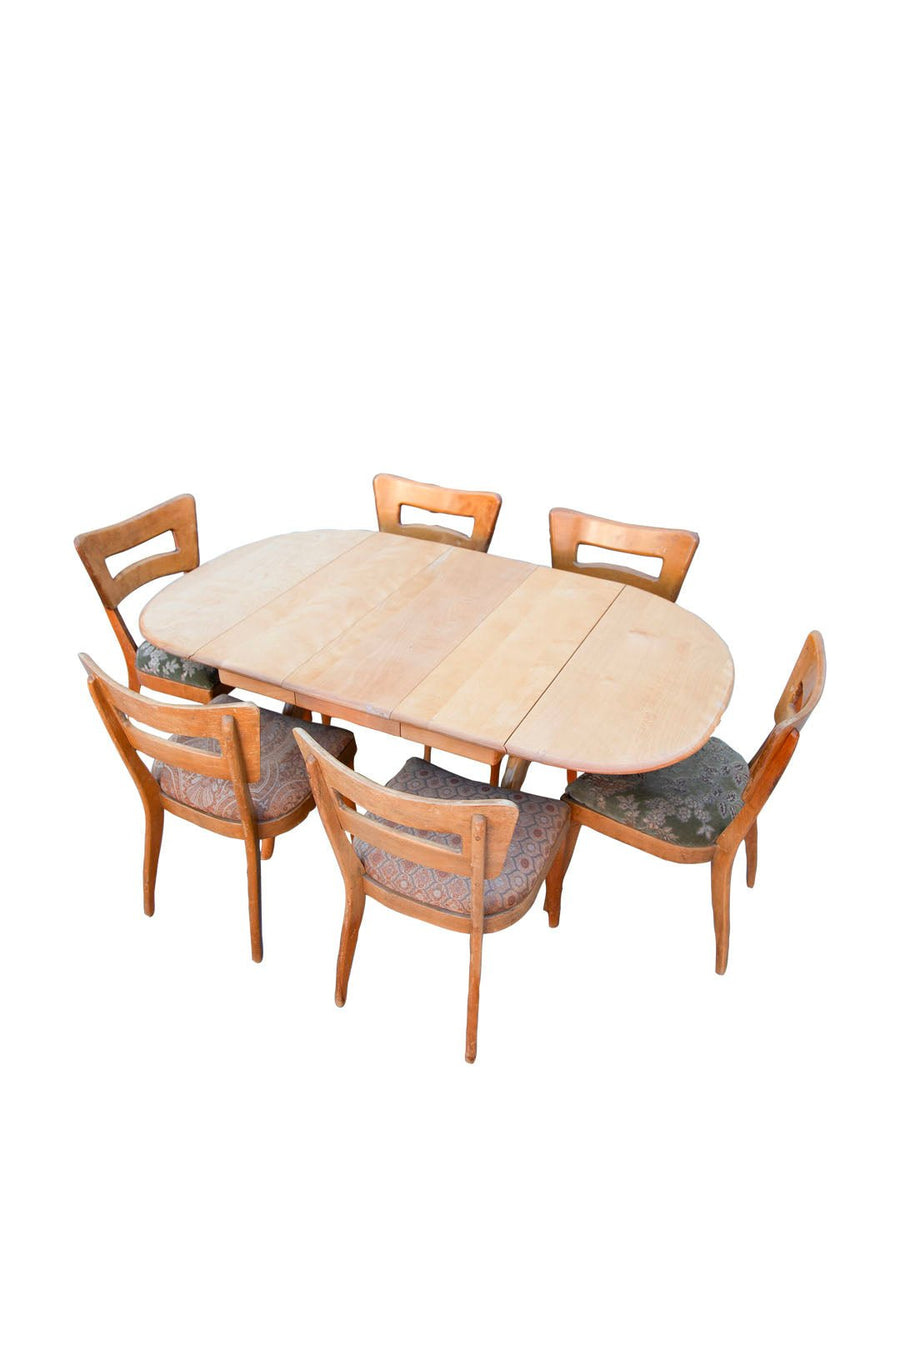 Mid-Century Modern Heywood Wakefield Dining Table (2 Leaf) With 6 